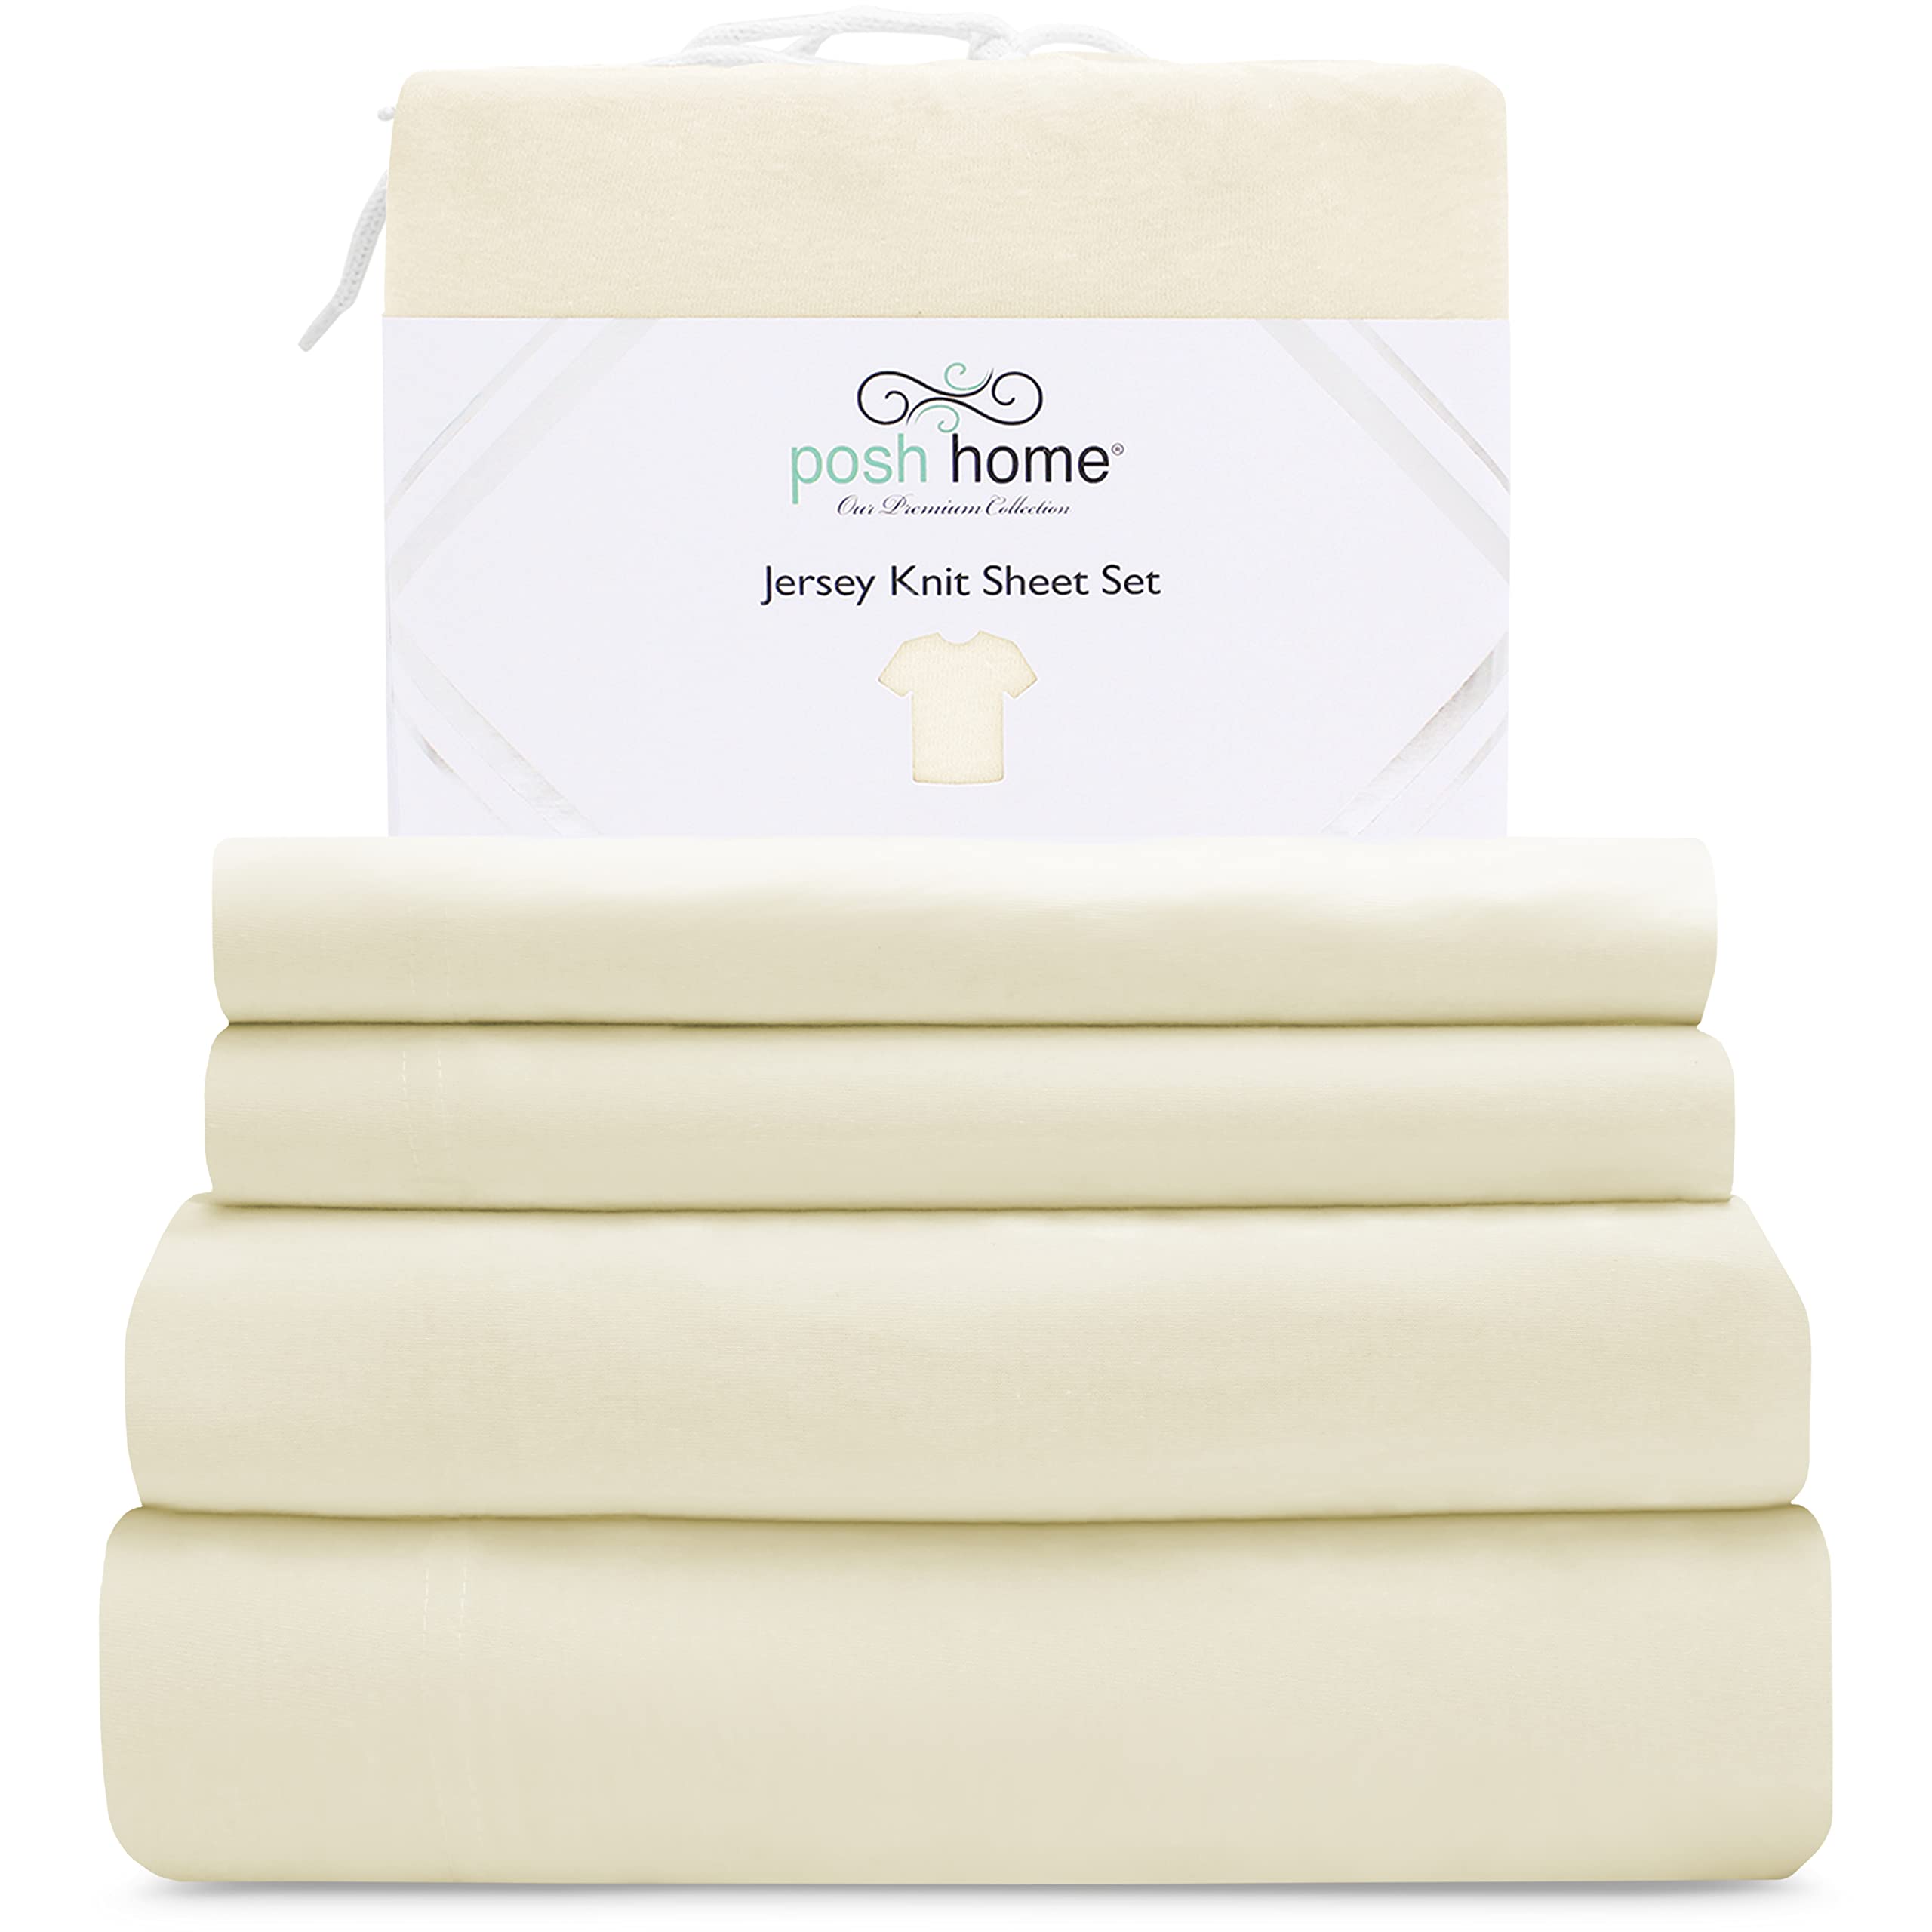 Posh Home Jersey Knit Sheet Set - 3-Piece Jersey Bed Sheets - T-Shirt Breathable & Soft cotton Jersey Sheets - Includes Flat She